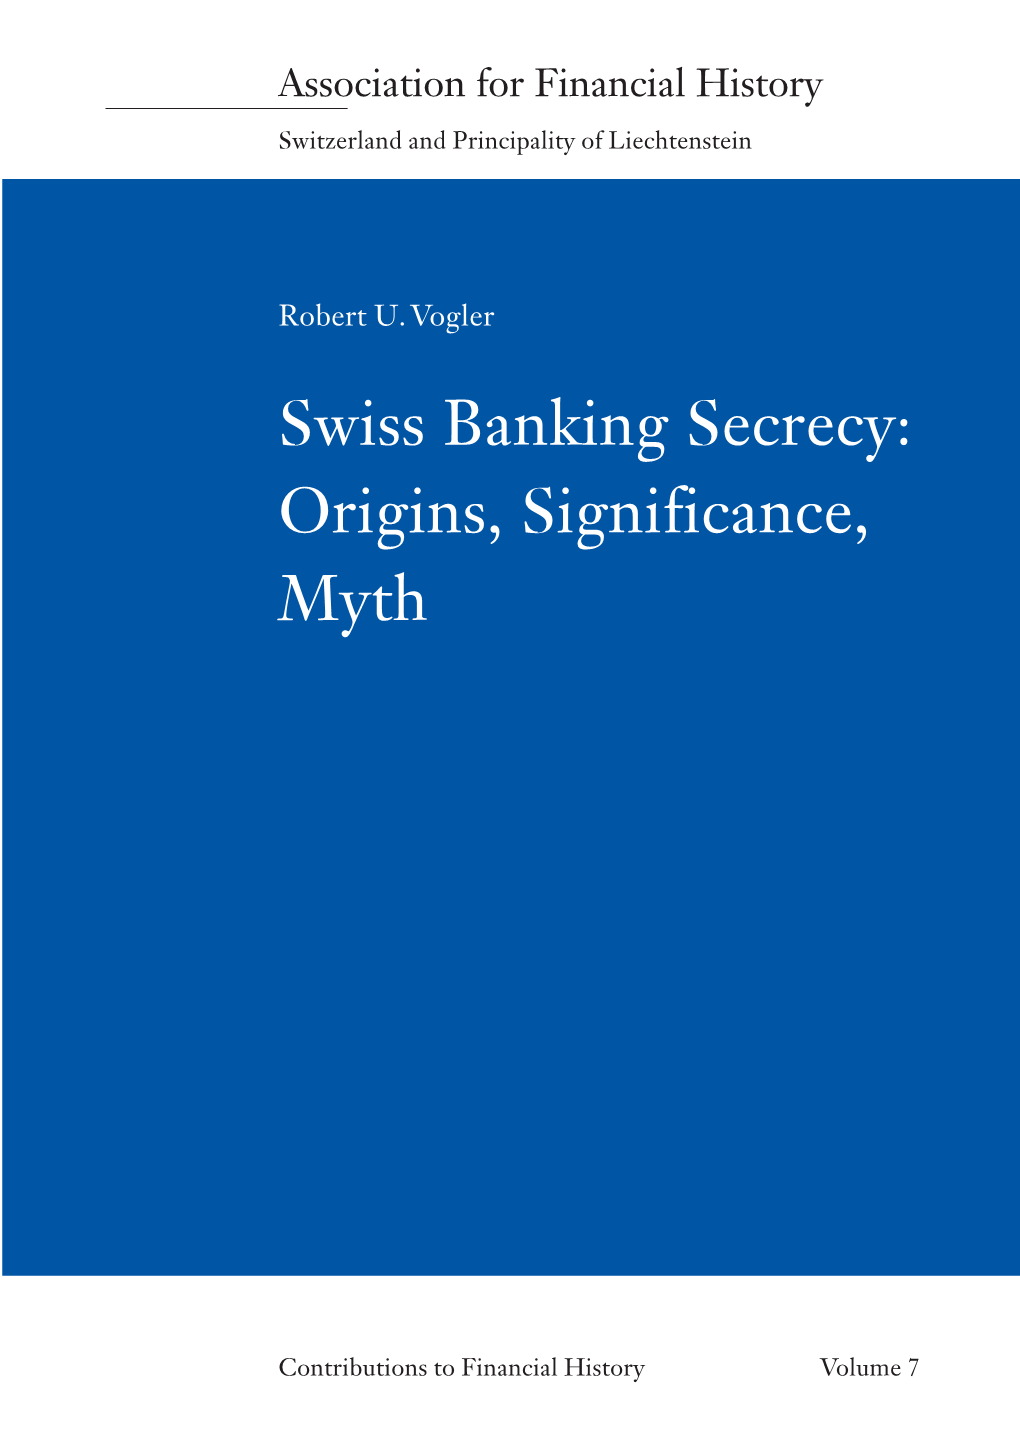 Swiss Banking Secrecy: Origins, Significance, Myth (Also Available in German)